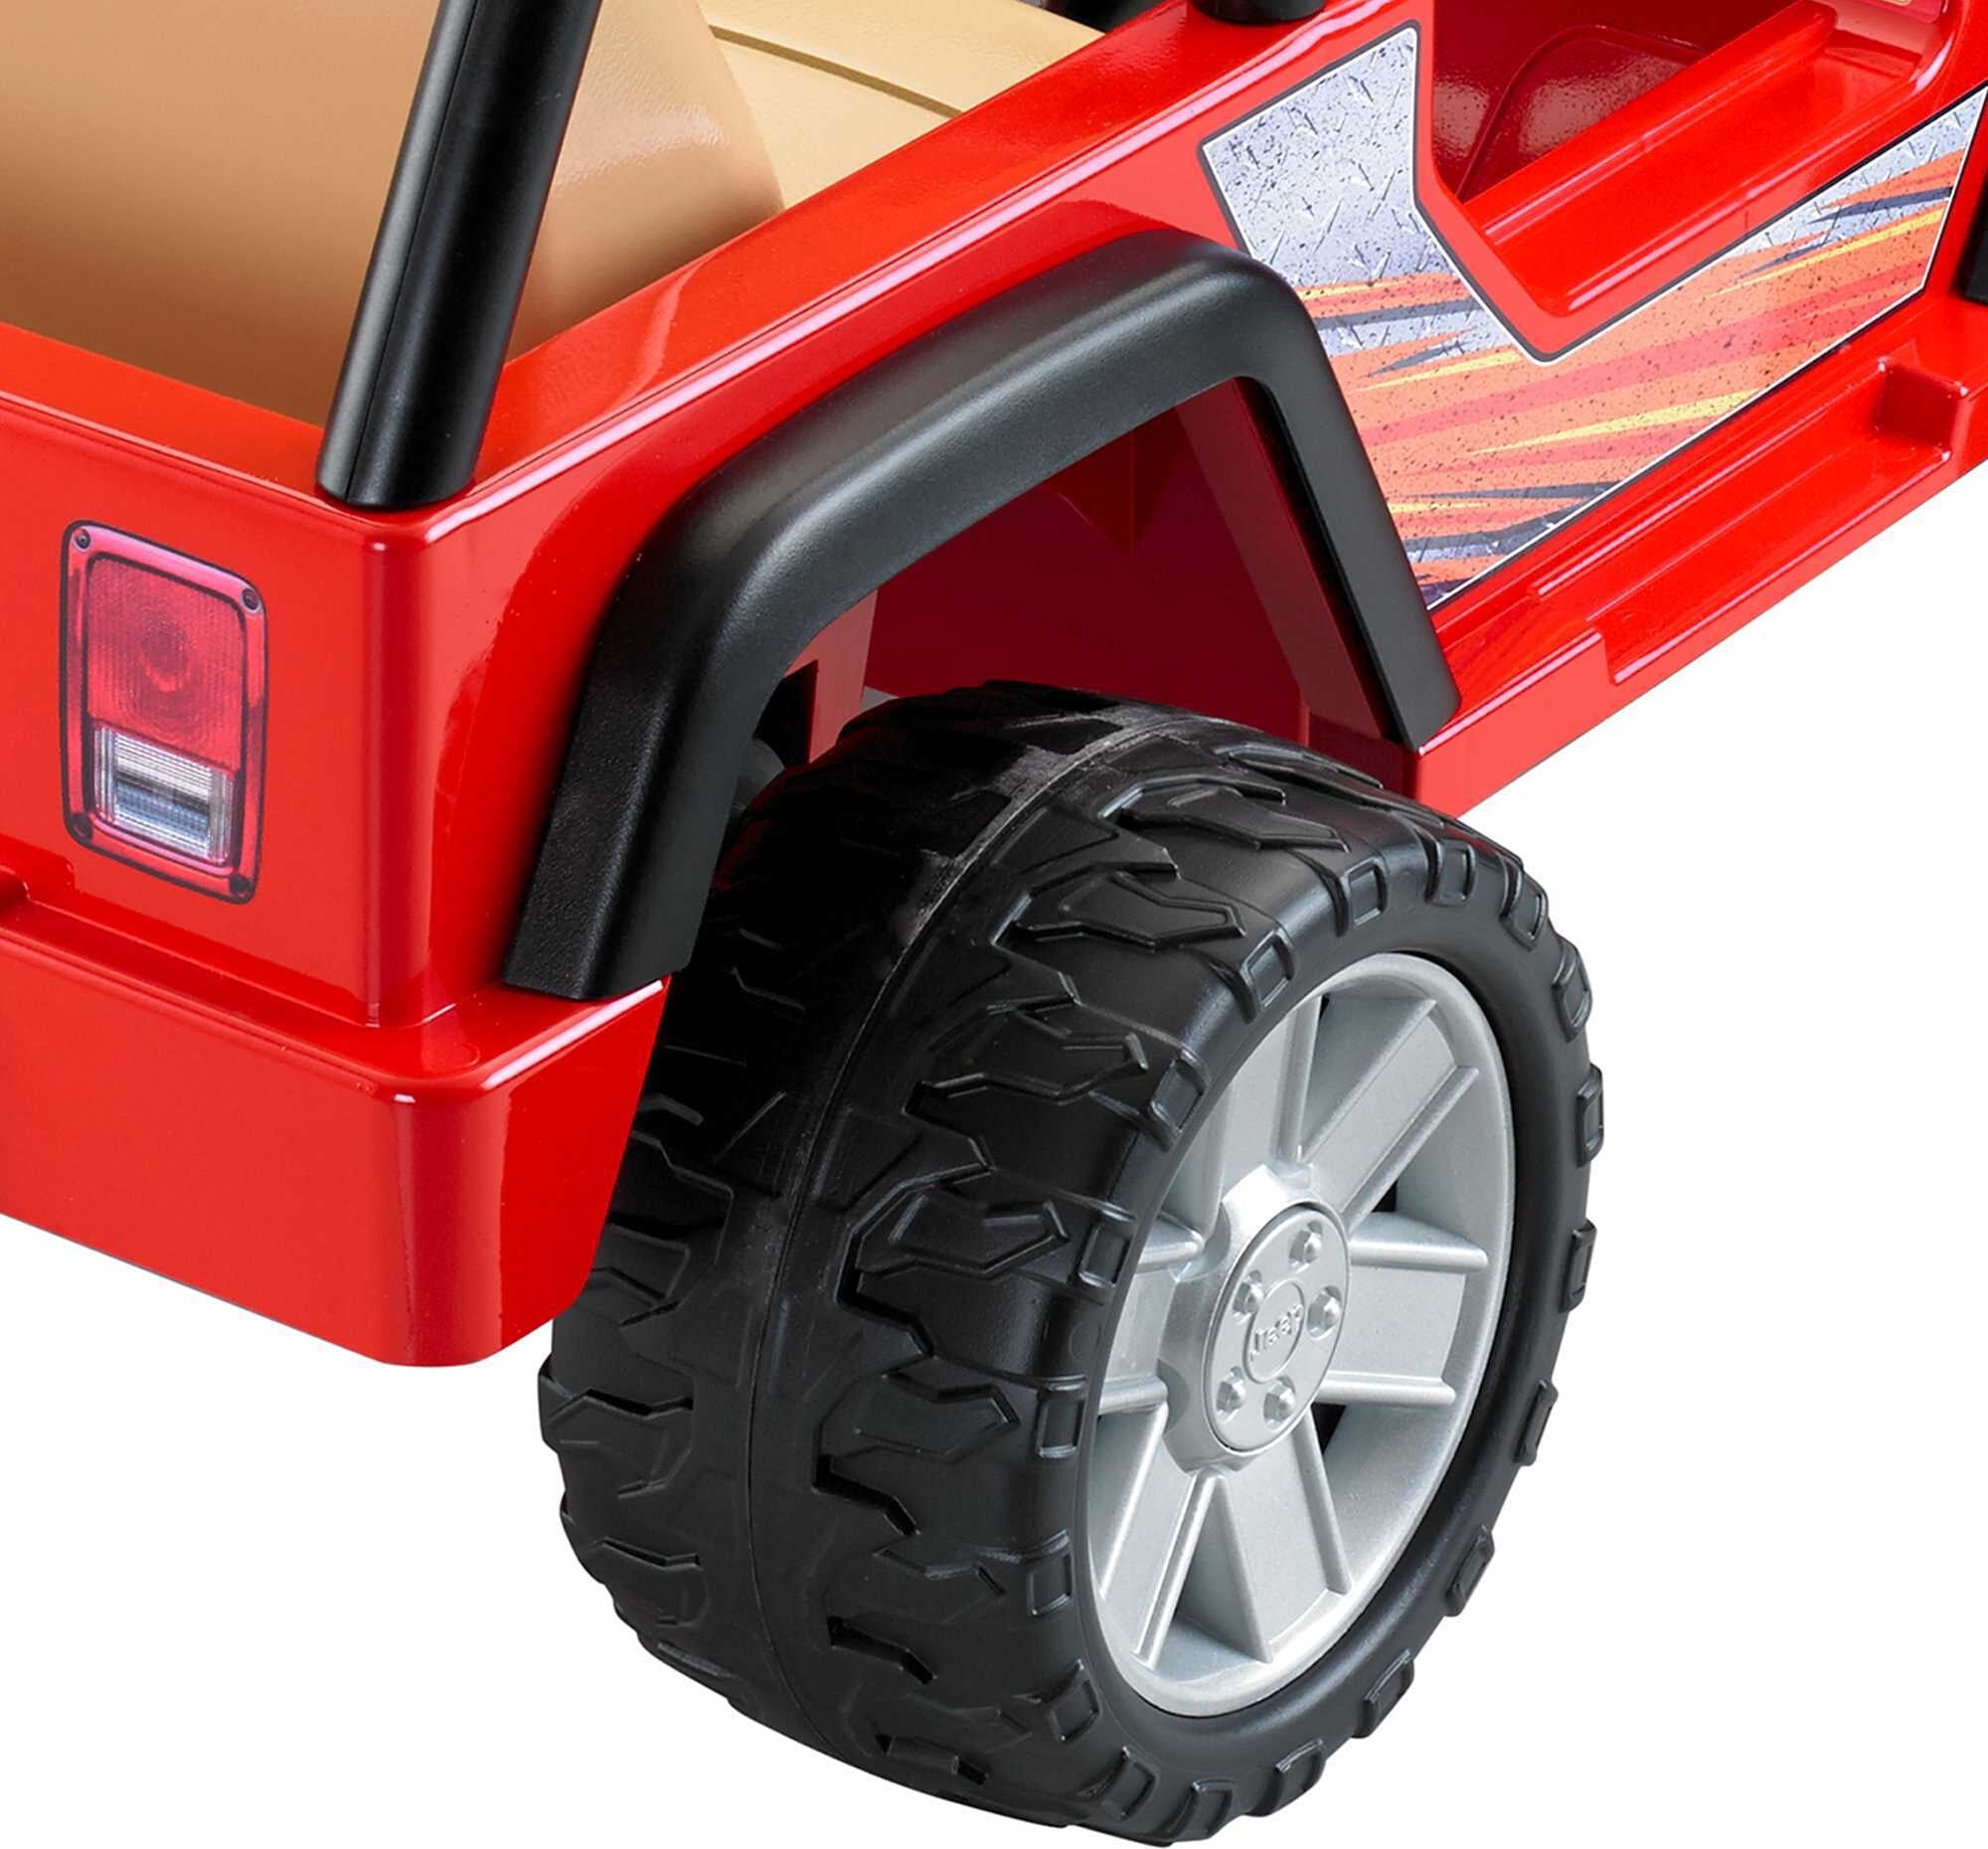 Power Wheels Jeep Wrangler 12-Volt Battery-Powered Ride-On Toy Vehicle with  Charger, Seats 2, Red 